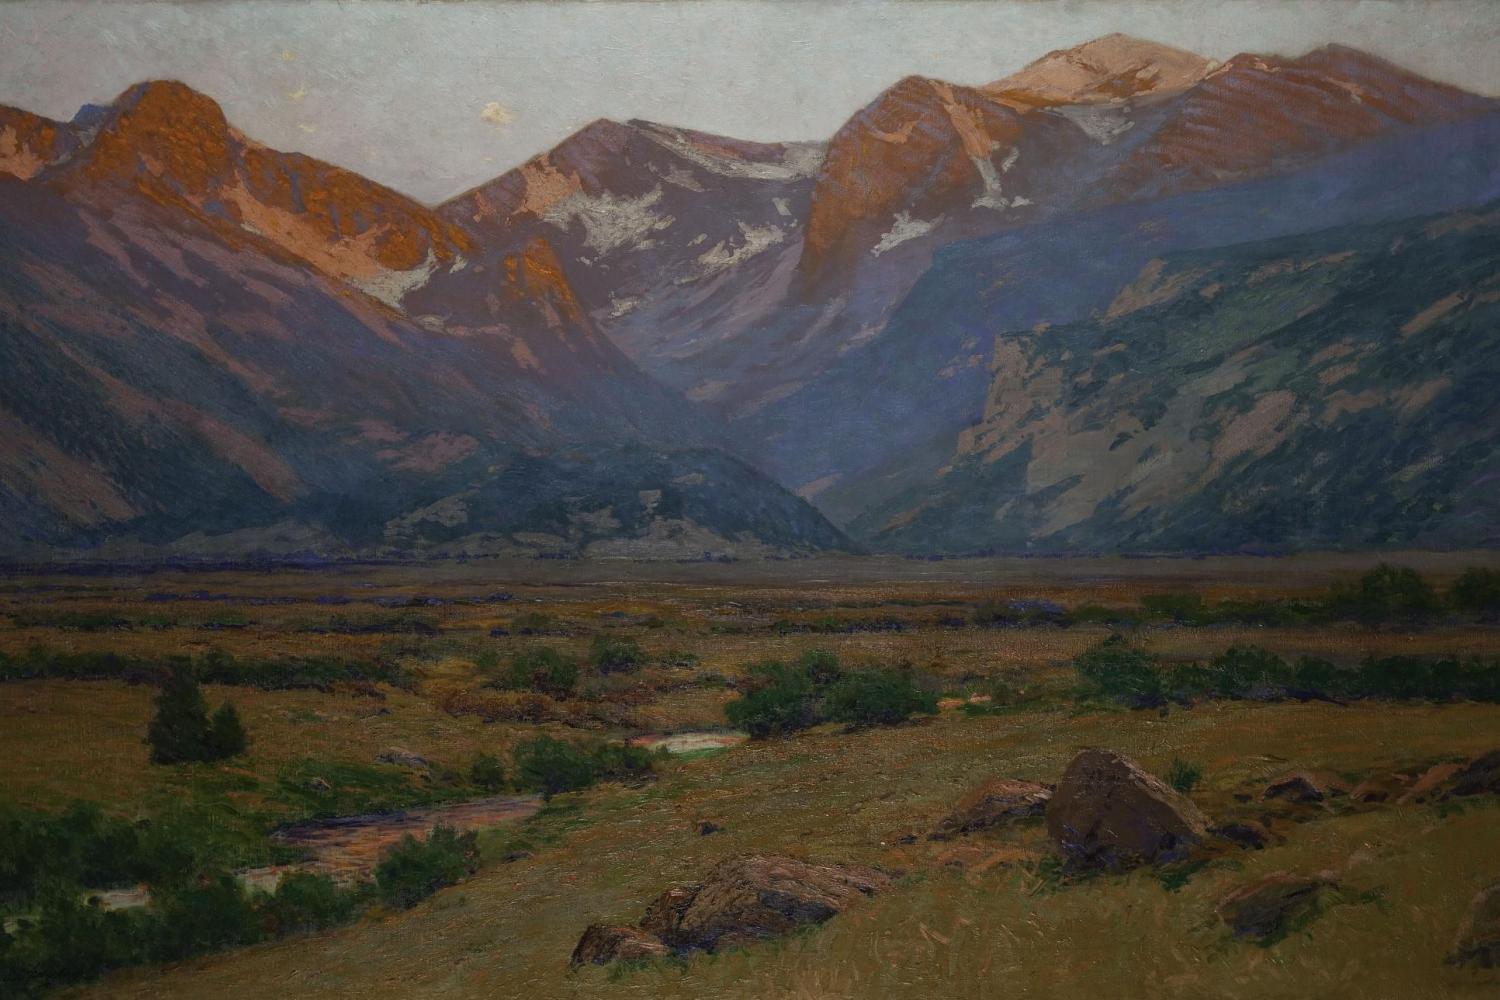 Painting of a mountain valley